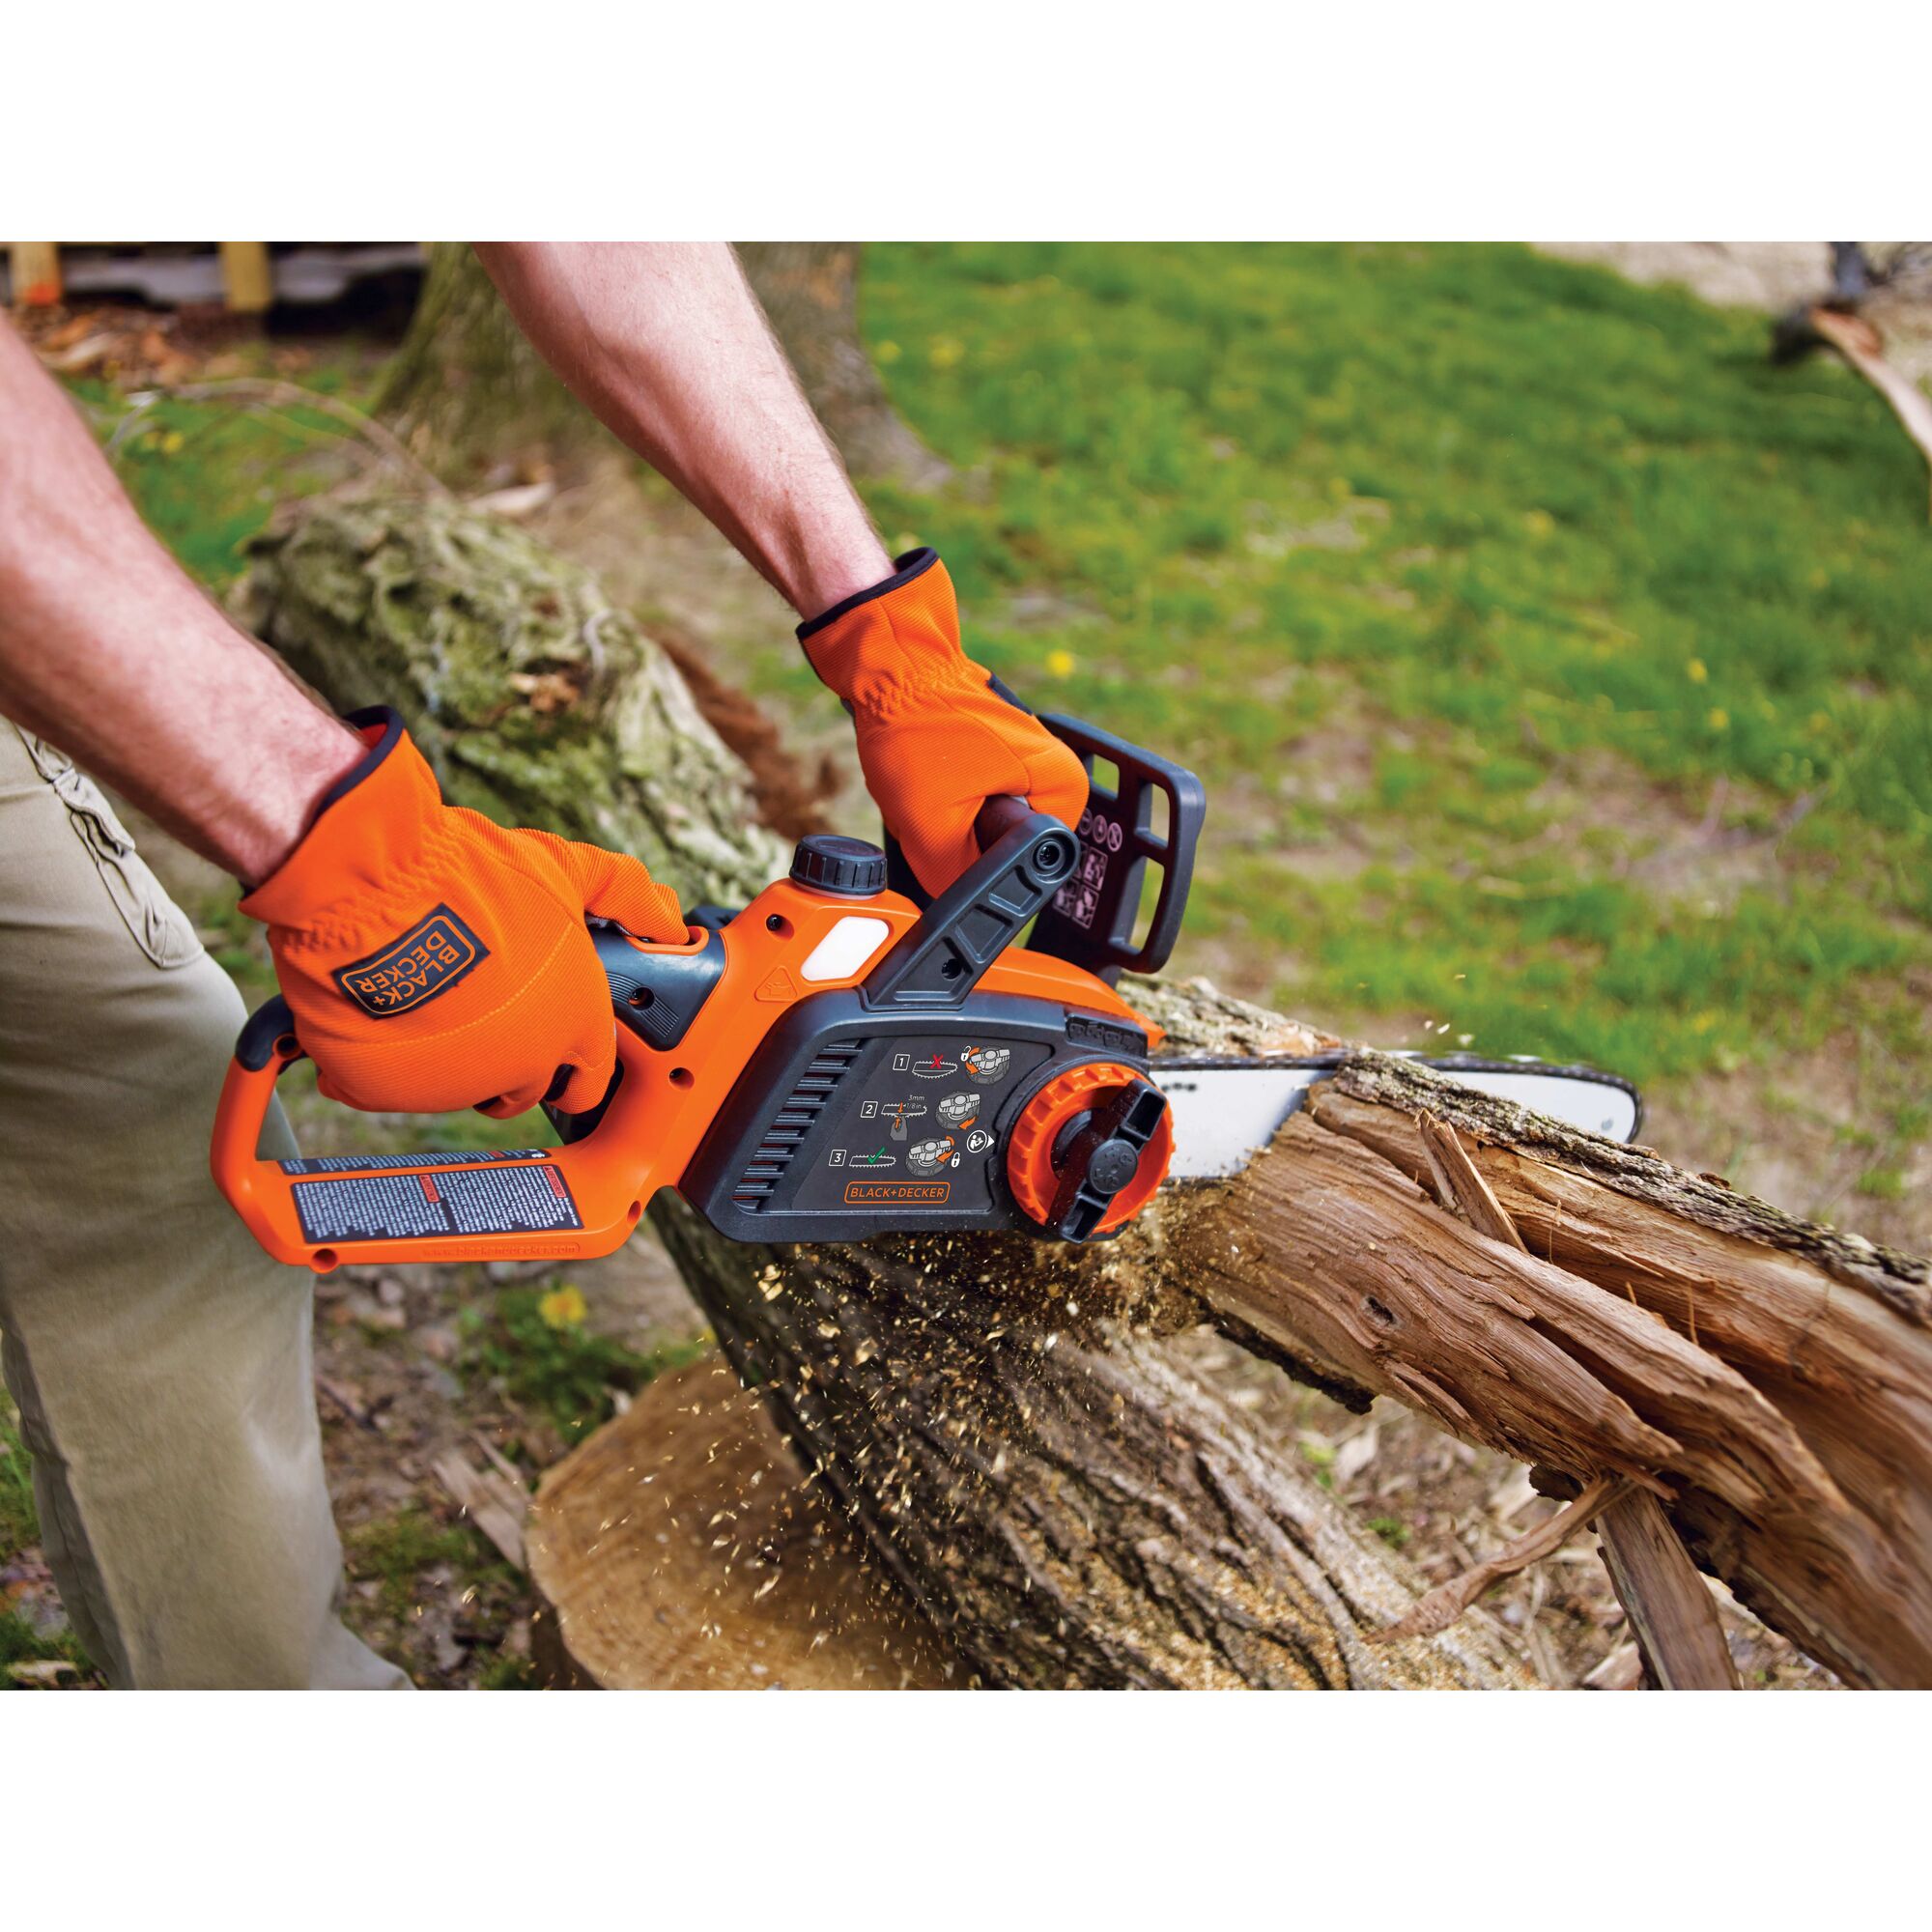 Lithium 12 inch Chainsaw being used for cutting tree bark.